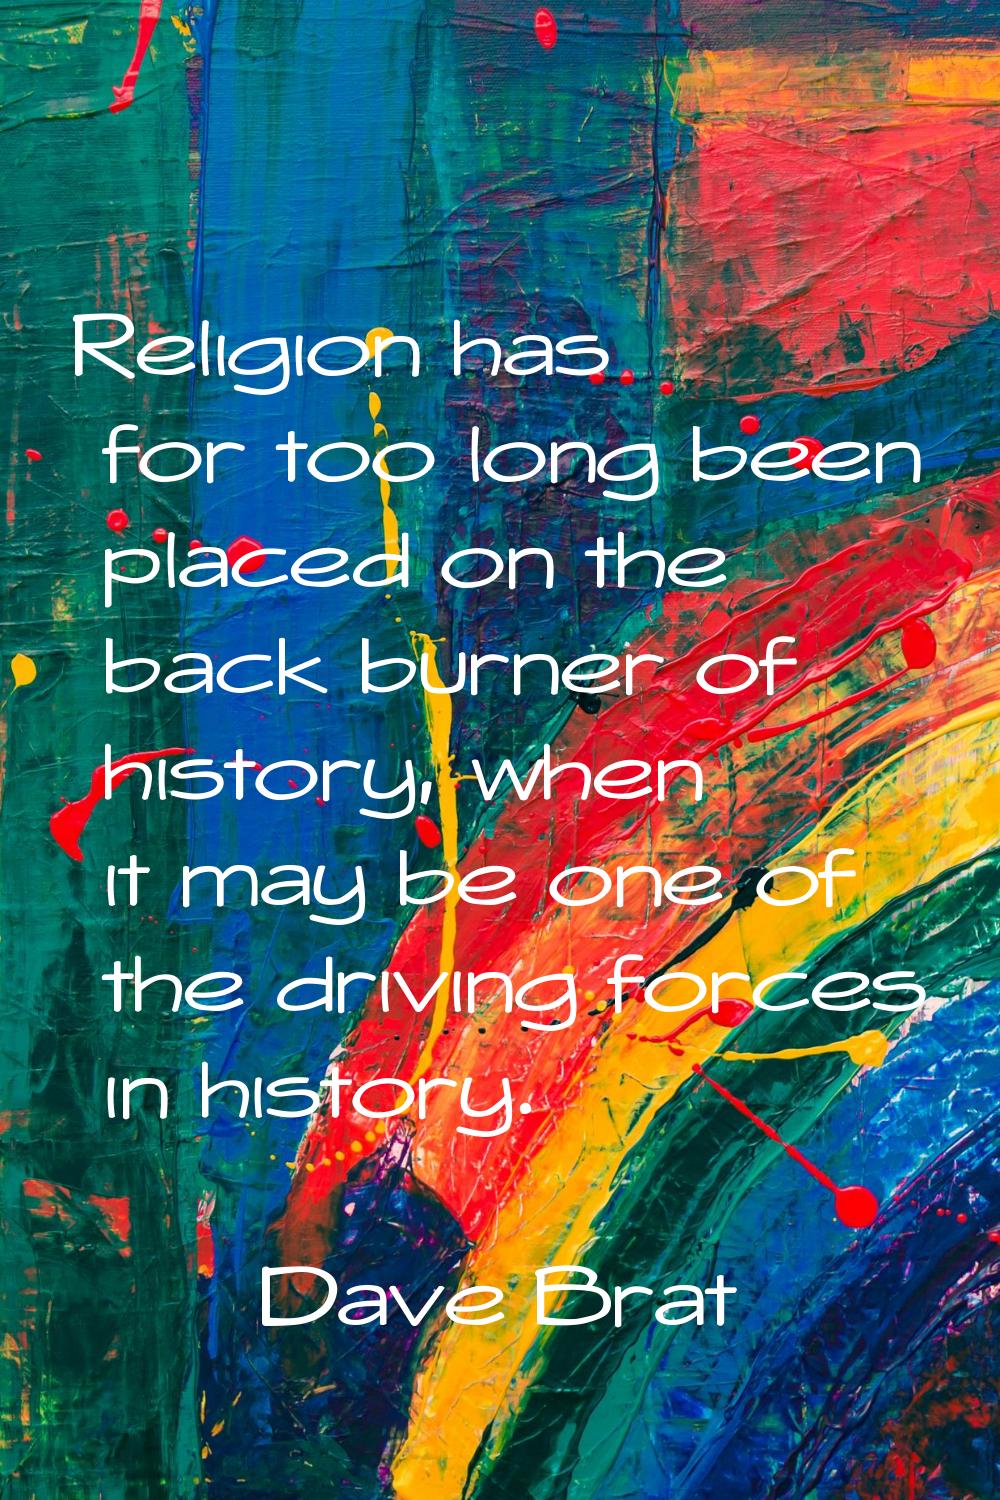 Religion has for too long been placed on the back burner of history, when it may be one of the driv